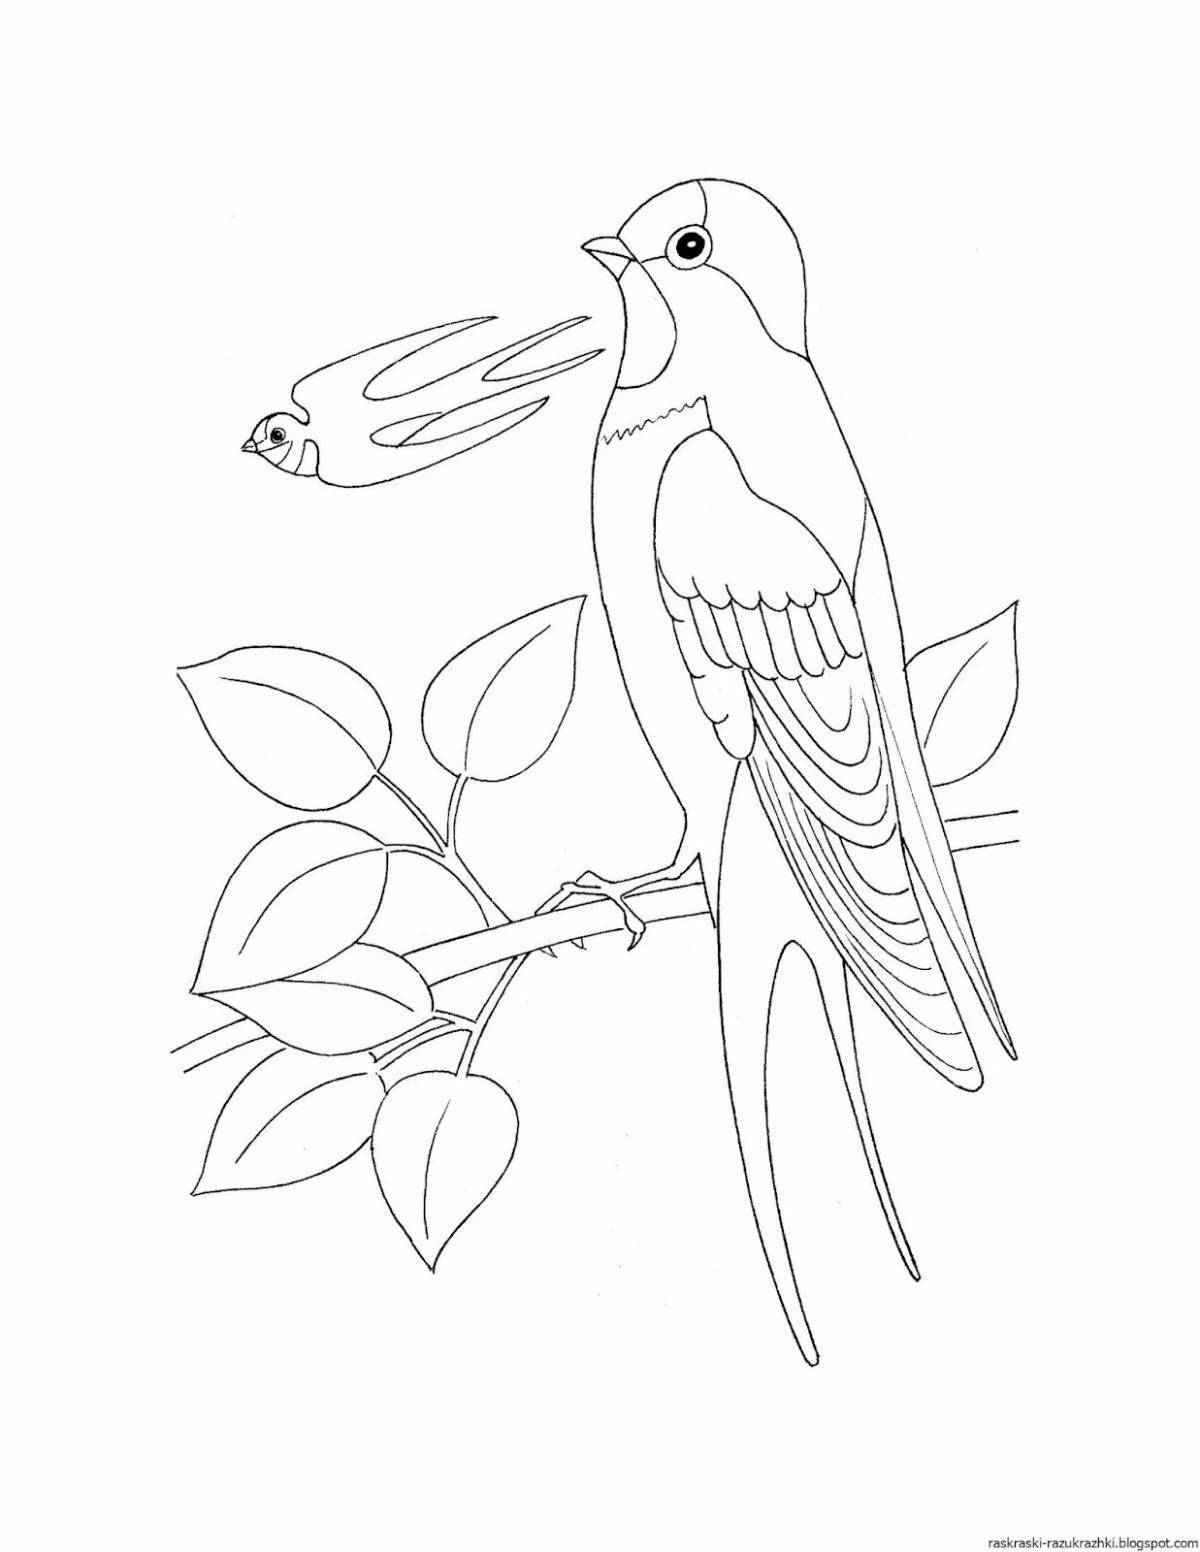 Adorable coloring book of migratory birds for 6-7 year olds